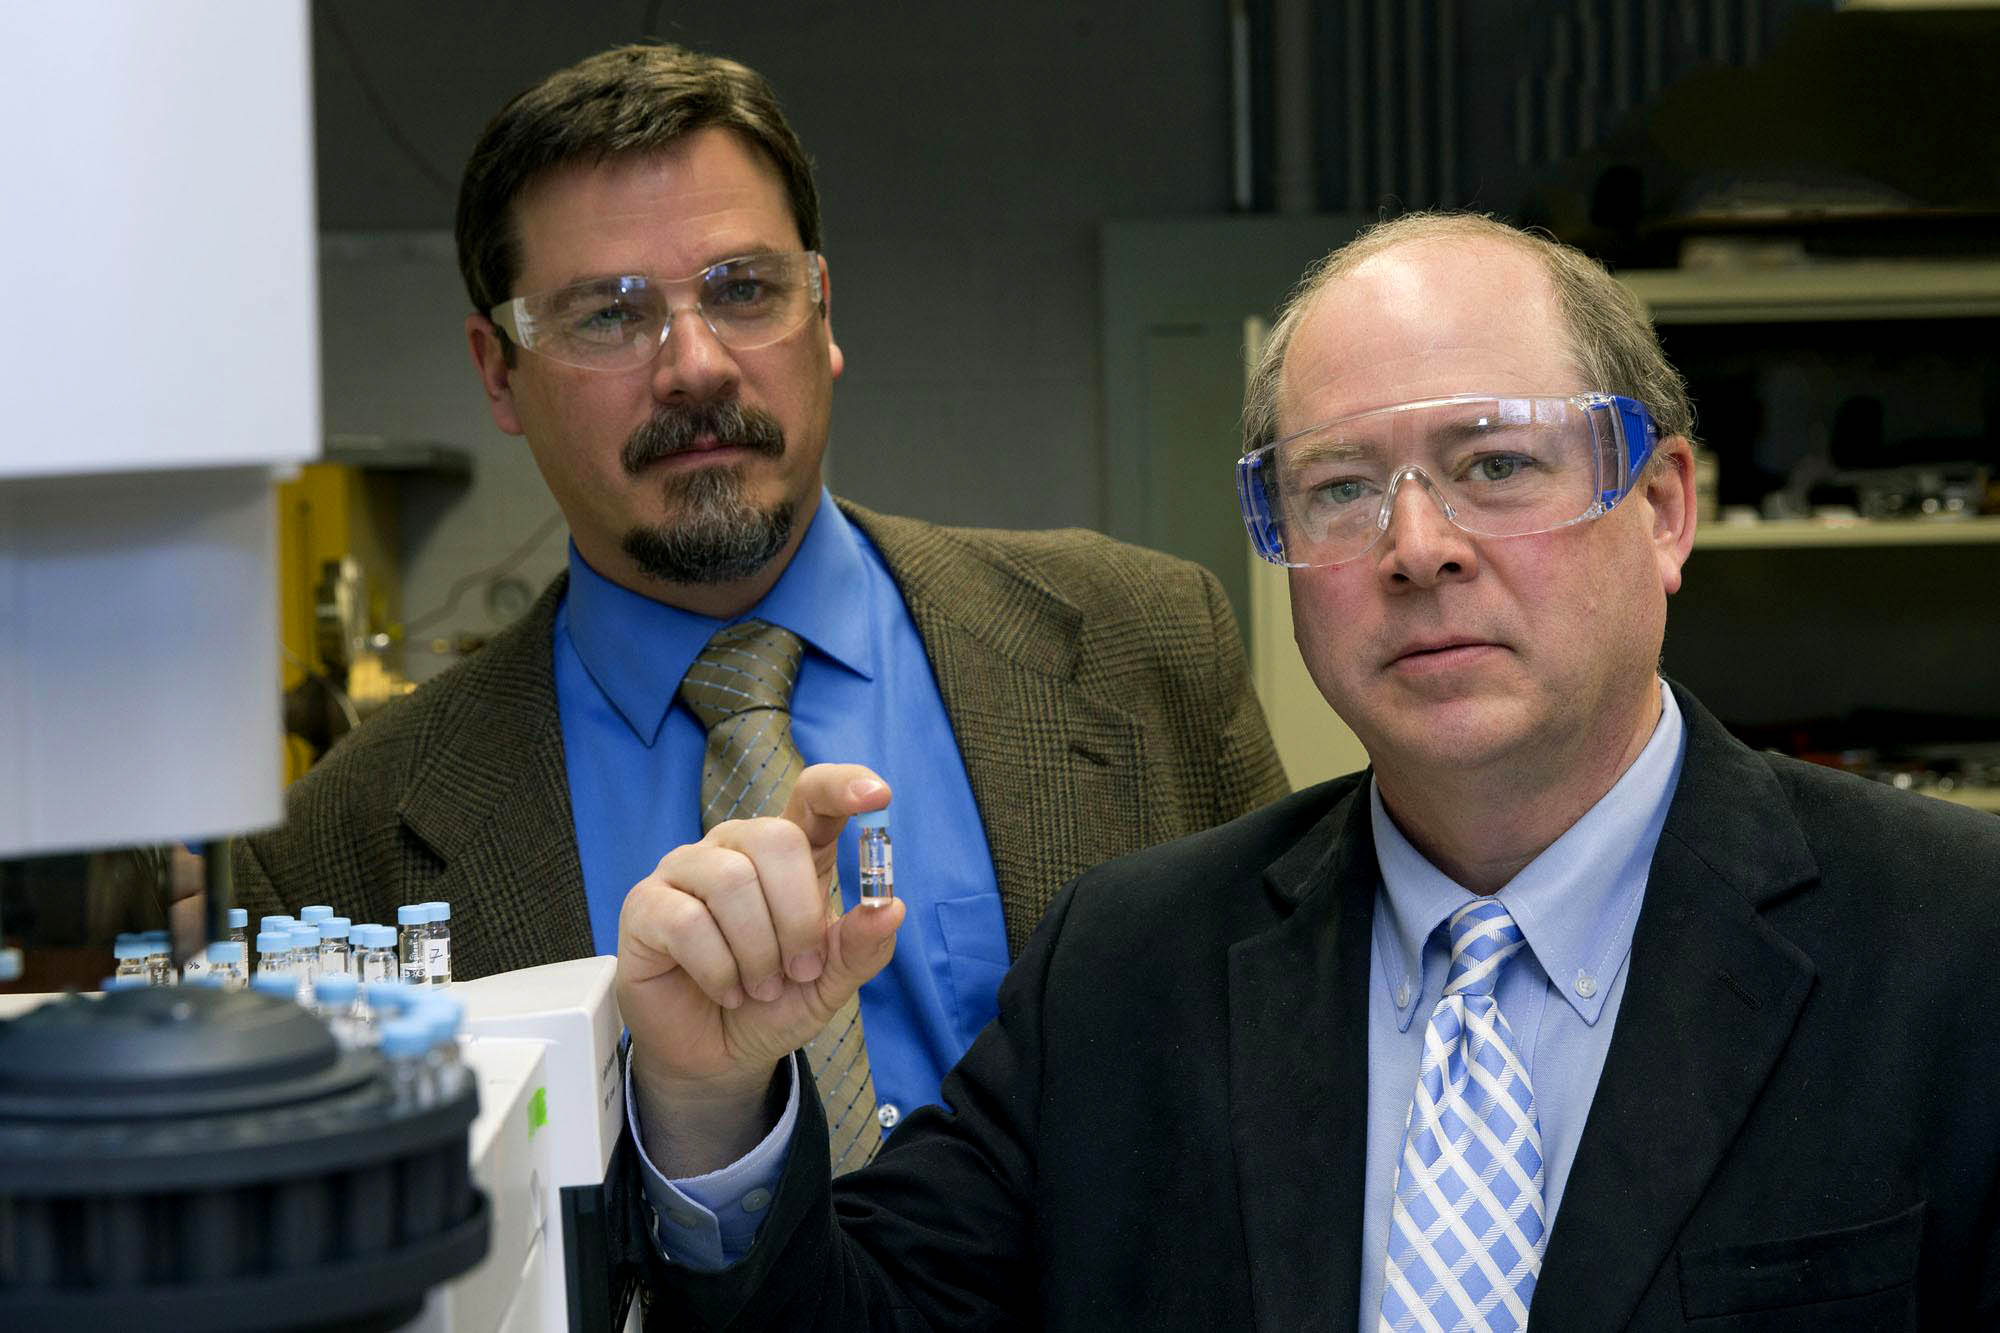 T. Brent Gunnoe and Robert Davis, co-directors of UVA’s side of MAXNET Energy, an initiative with Germany’s Max Planck Society. (Photo by Dan Addison)